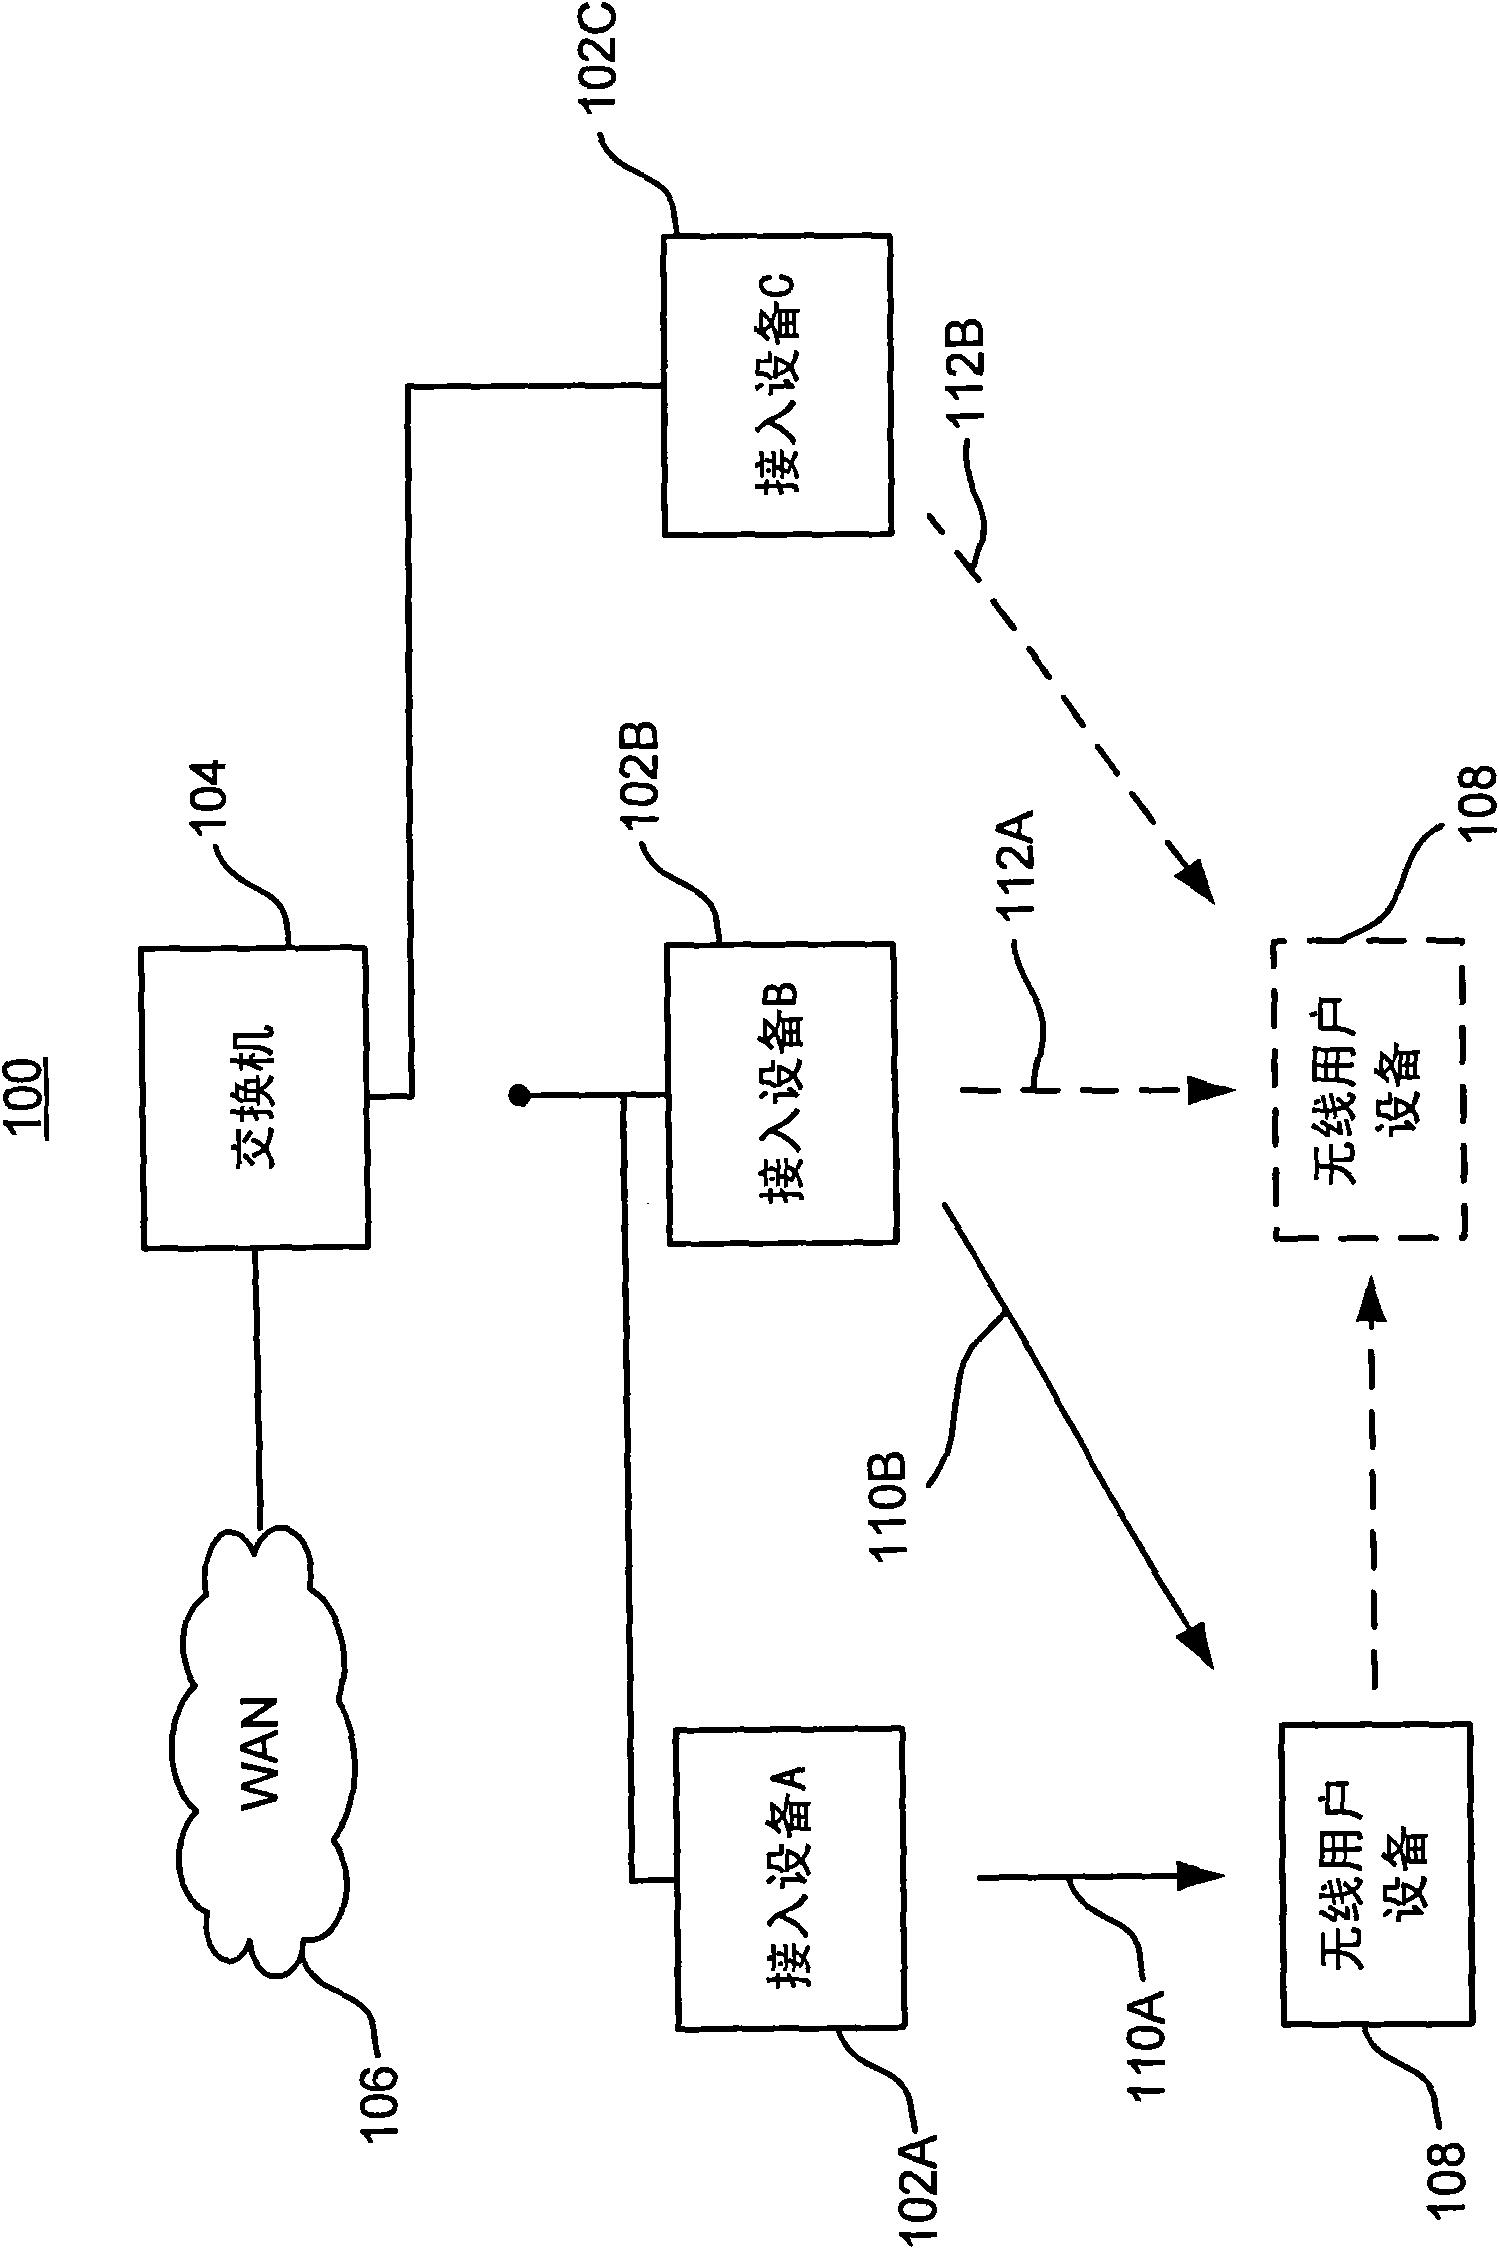 Neighbor discovery in a wireless system